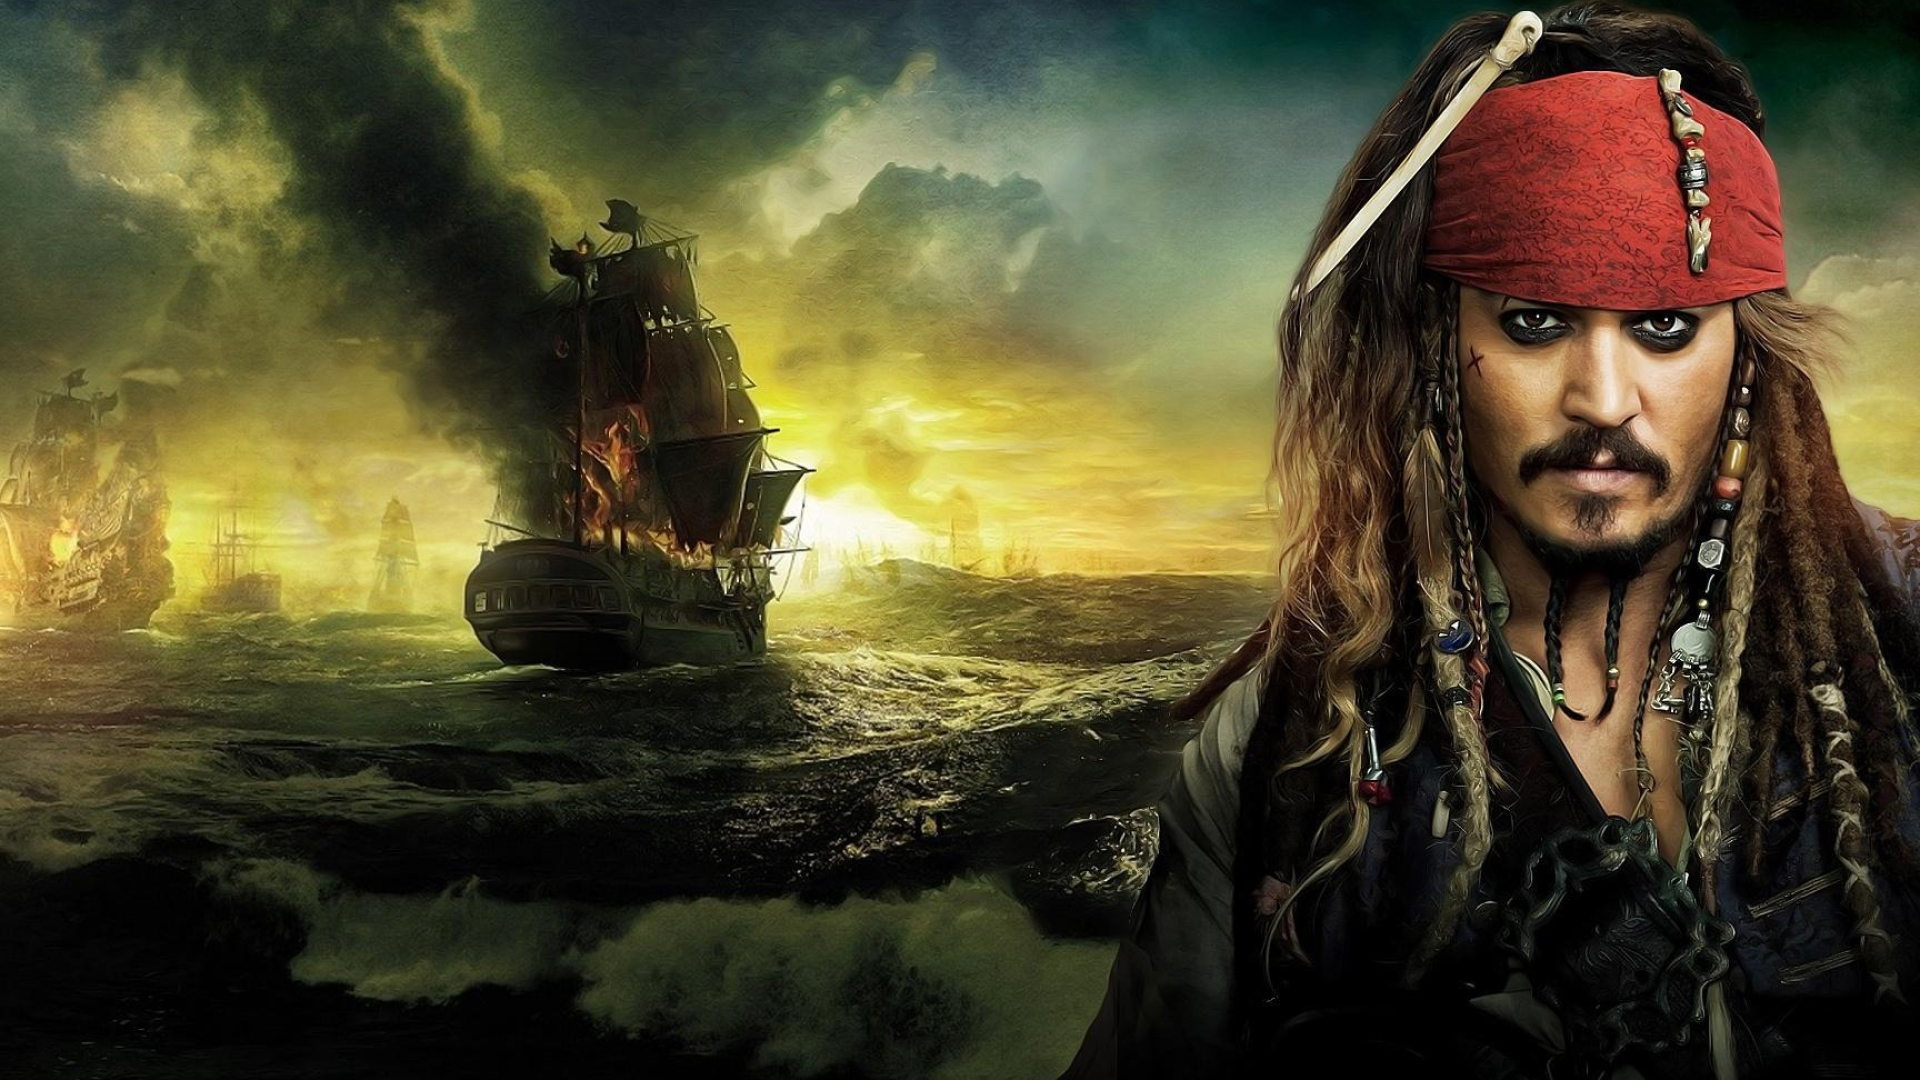 Pirates of the Caribbean: The character was created by screenwriters Ted Elliott and Terry Rossio and is portrayed by Johnny Depp. 1920x1080 Full HD Wallpaper.